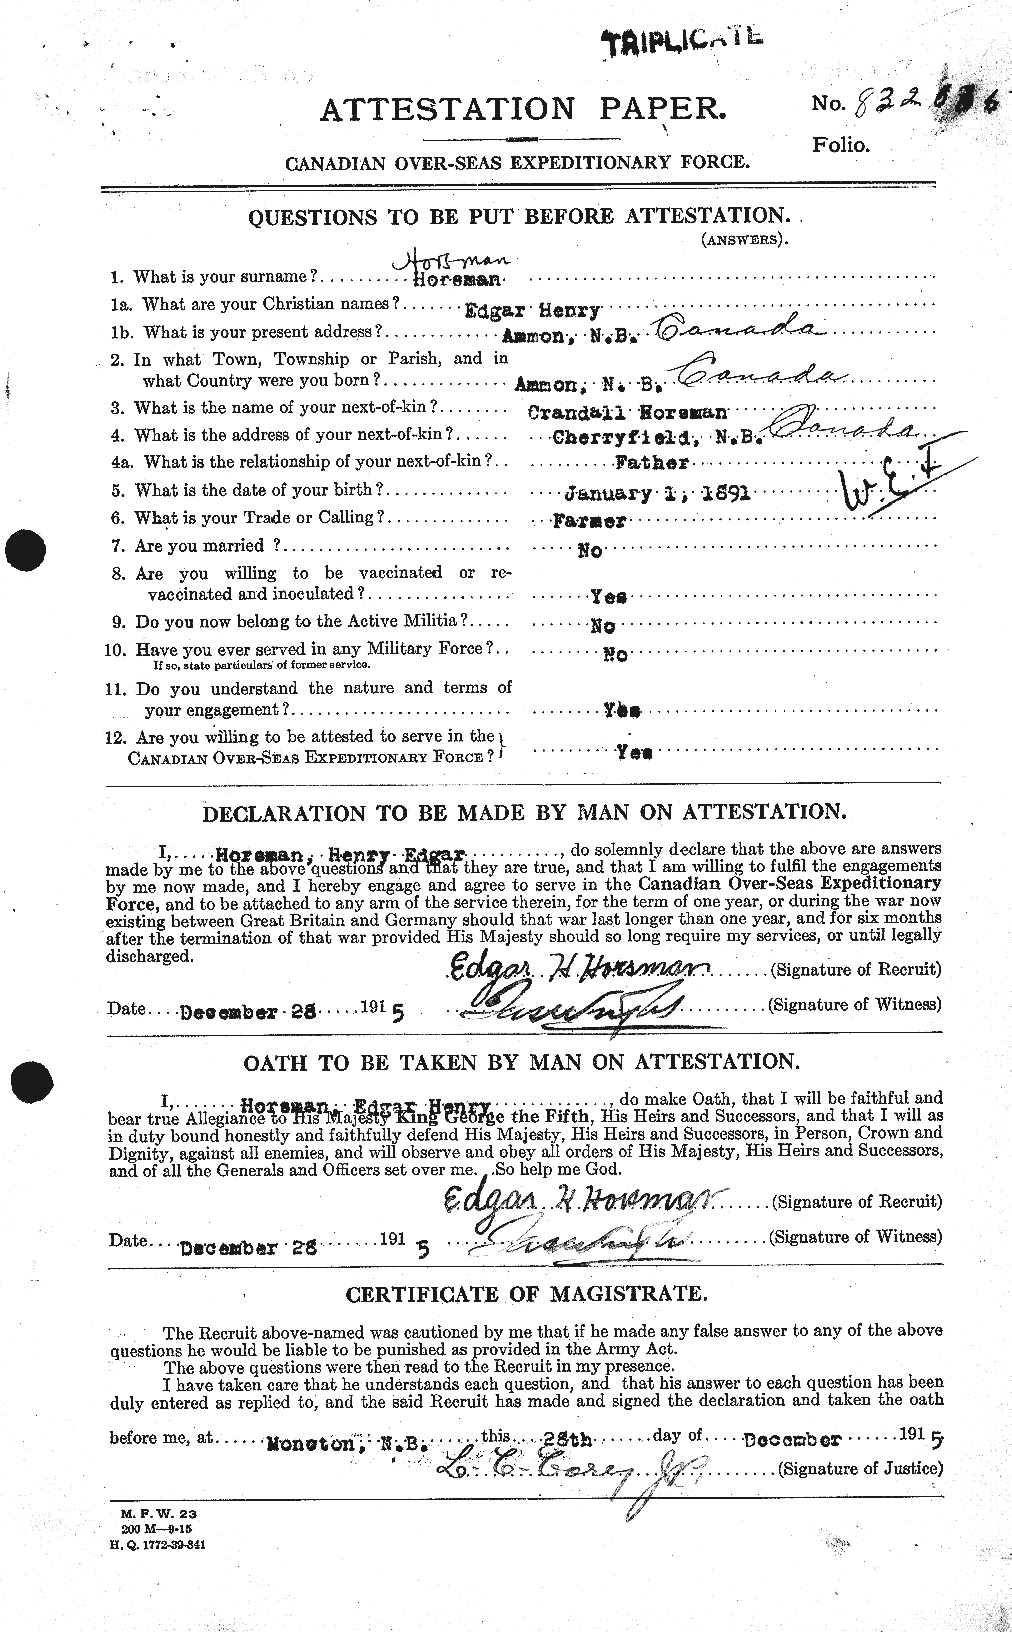 Personnel Records of the First World War - CEF 401023a